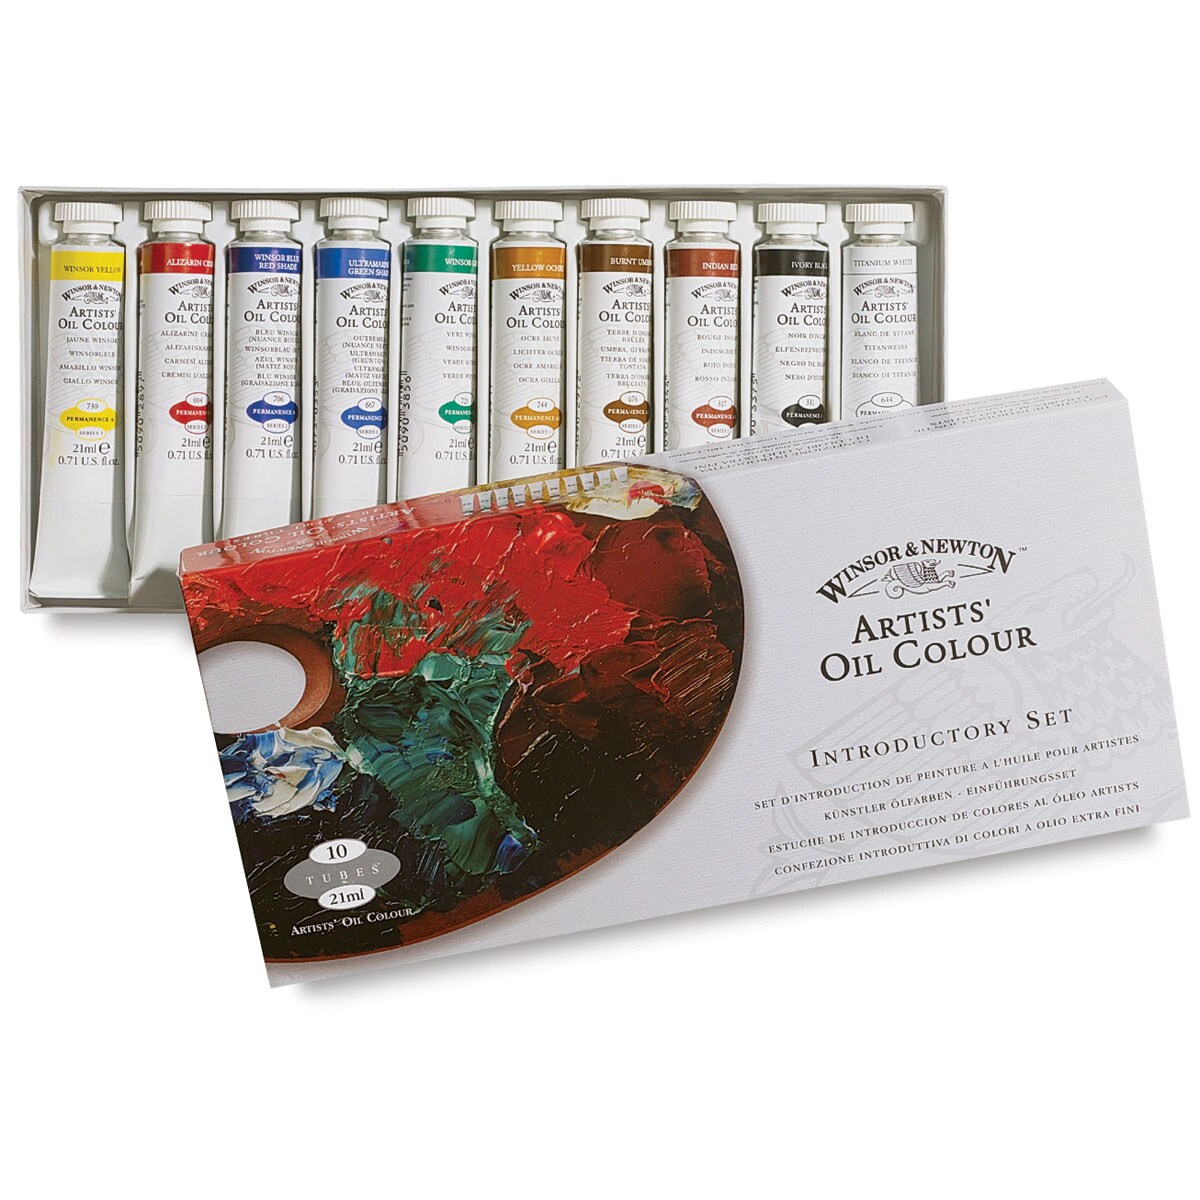 Winsor &#x26; Newton Artists&#x27; Oil Colors - Introductory Set, Set of 10, 21 ml tubes